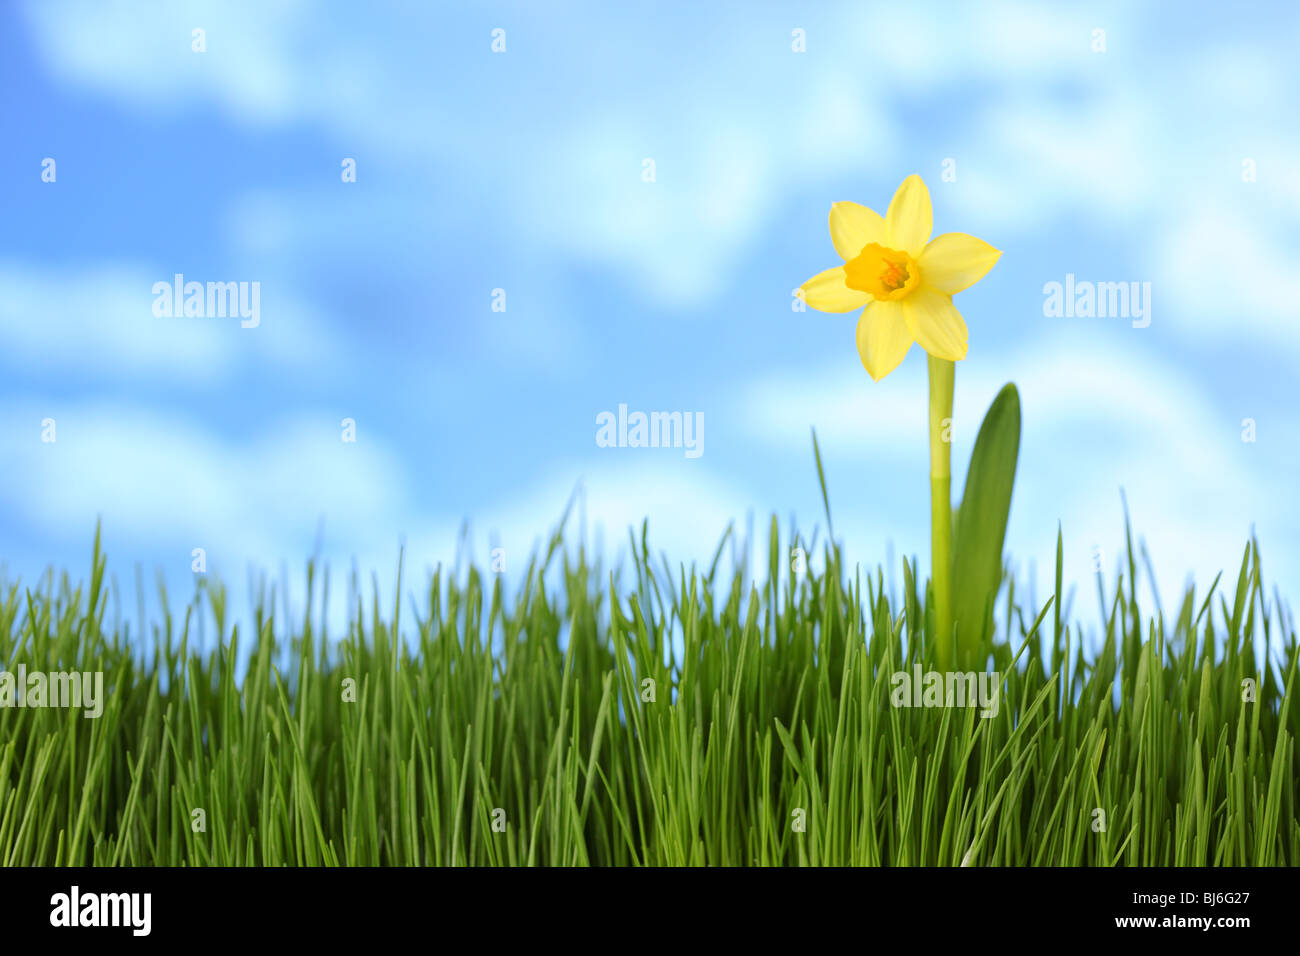 Daffodil in grass with blue sky Stock Photo